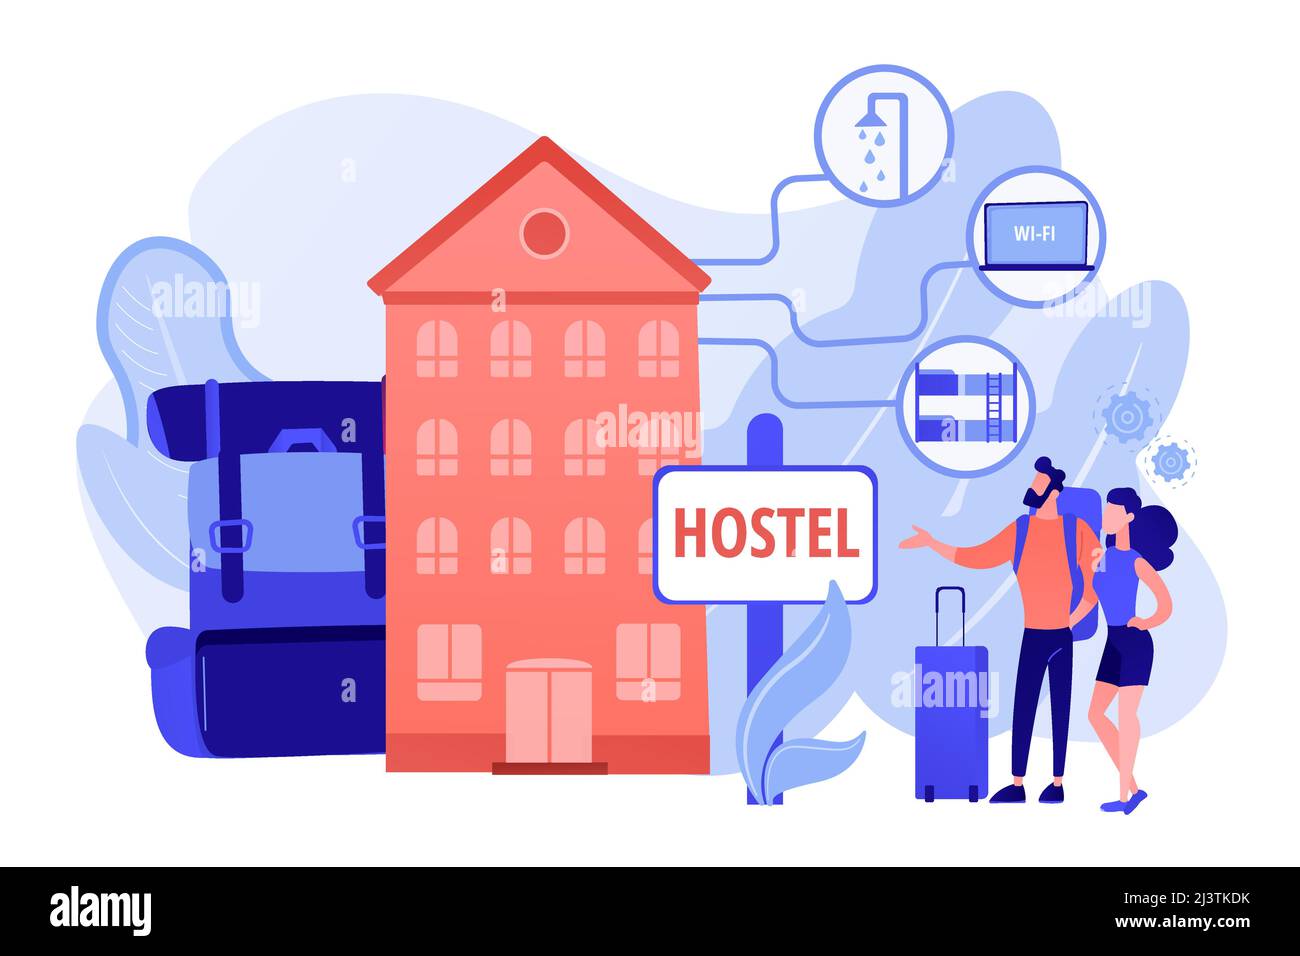 Cheap inn, affordable guesthouse. College dormitory, motel check in. Hostel services, lower priced accommodation, best hostel facilities concept. Pink Stock Vector